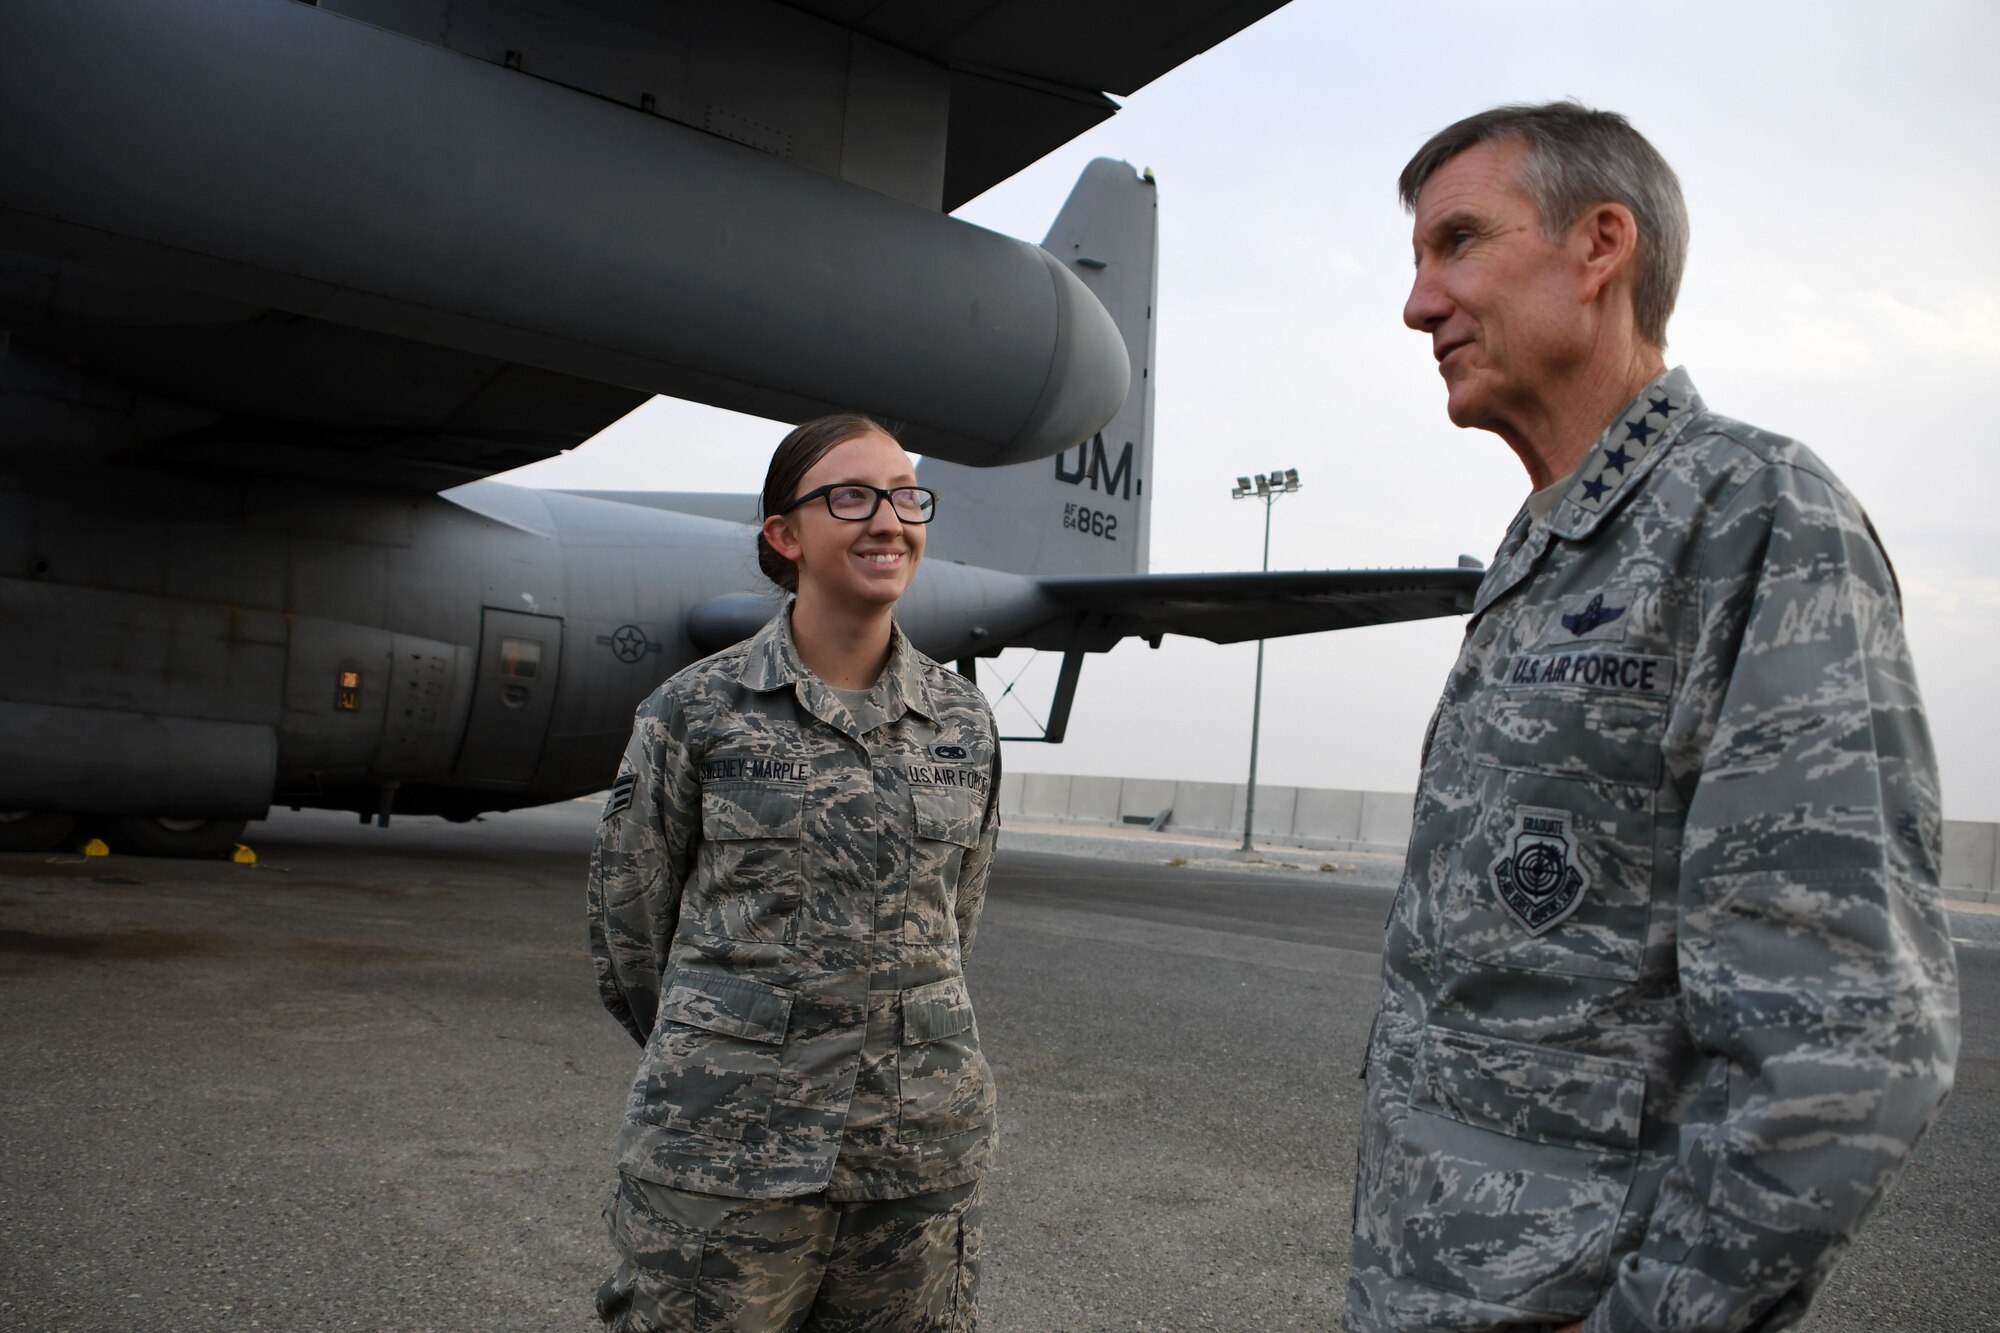 U.S. Air Force Gen. Hawk Carlisle, commander of Air Combat Command, talks with Senior Airman Colleen Sweeney-Marple, 386th Expeditionary Aircraft Maintenance Squadron assistant dedicated crew chief, Nov. 23, 2016 at an undisclosed location in Southwest Asia. During his visit, Carlisle praised the wing’s efforts providing airlift; electronic warfare; and intelligence, surveillance and reconnaissance capabilities in the fight against the Islamic State of Iraq and the Levant. (U.S. Air Force photo/Senior Airman Andrew Park)